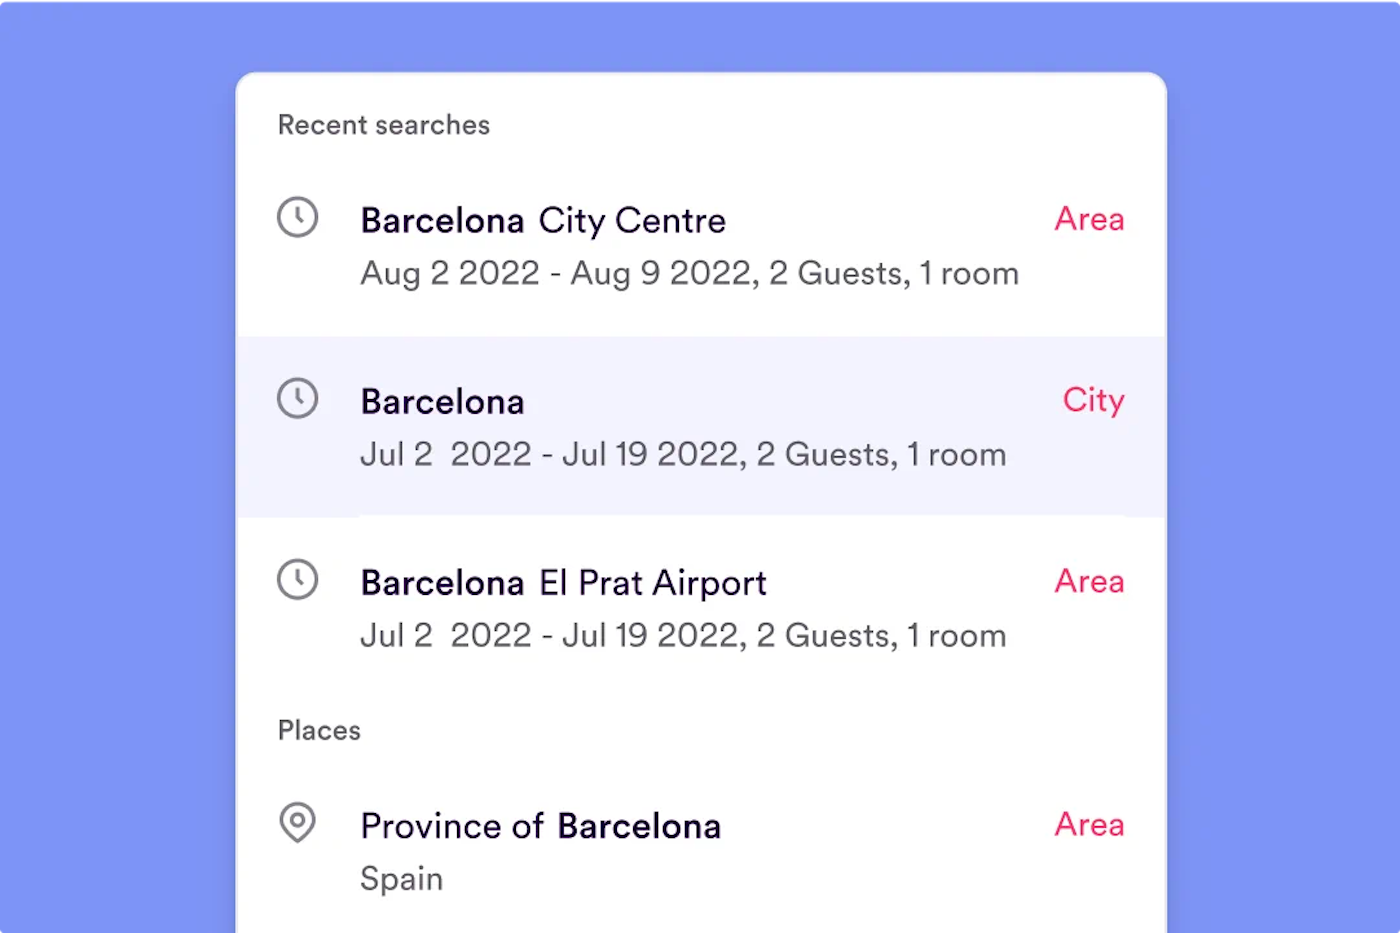 A part of an User Interface for Vio.com that shows city names and dates. The User Interface snippet is displayed on a rectangle in a mobile phone screen ratio.